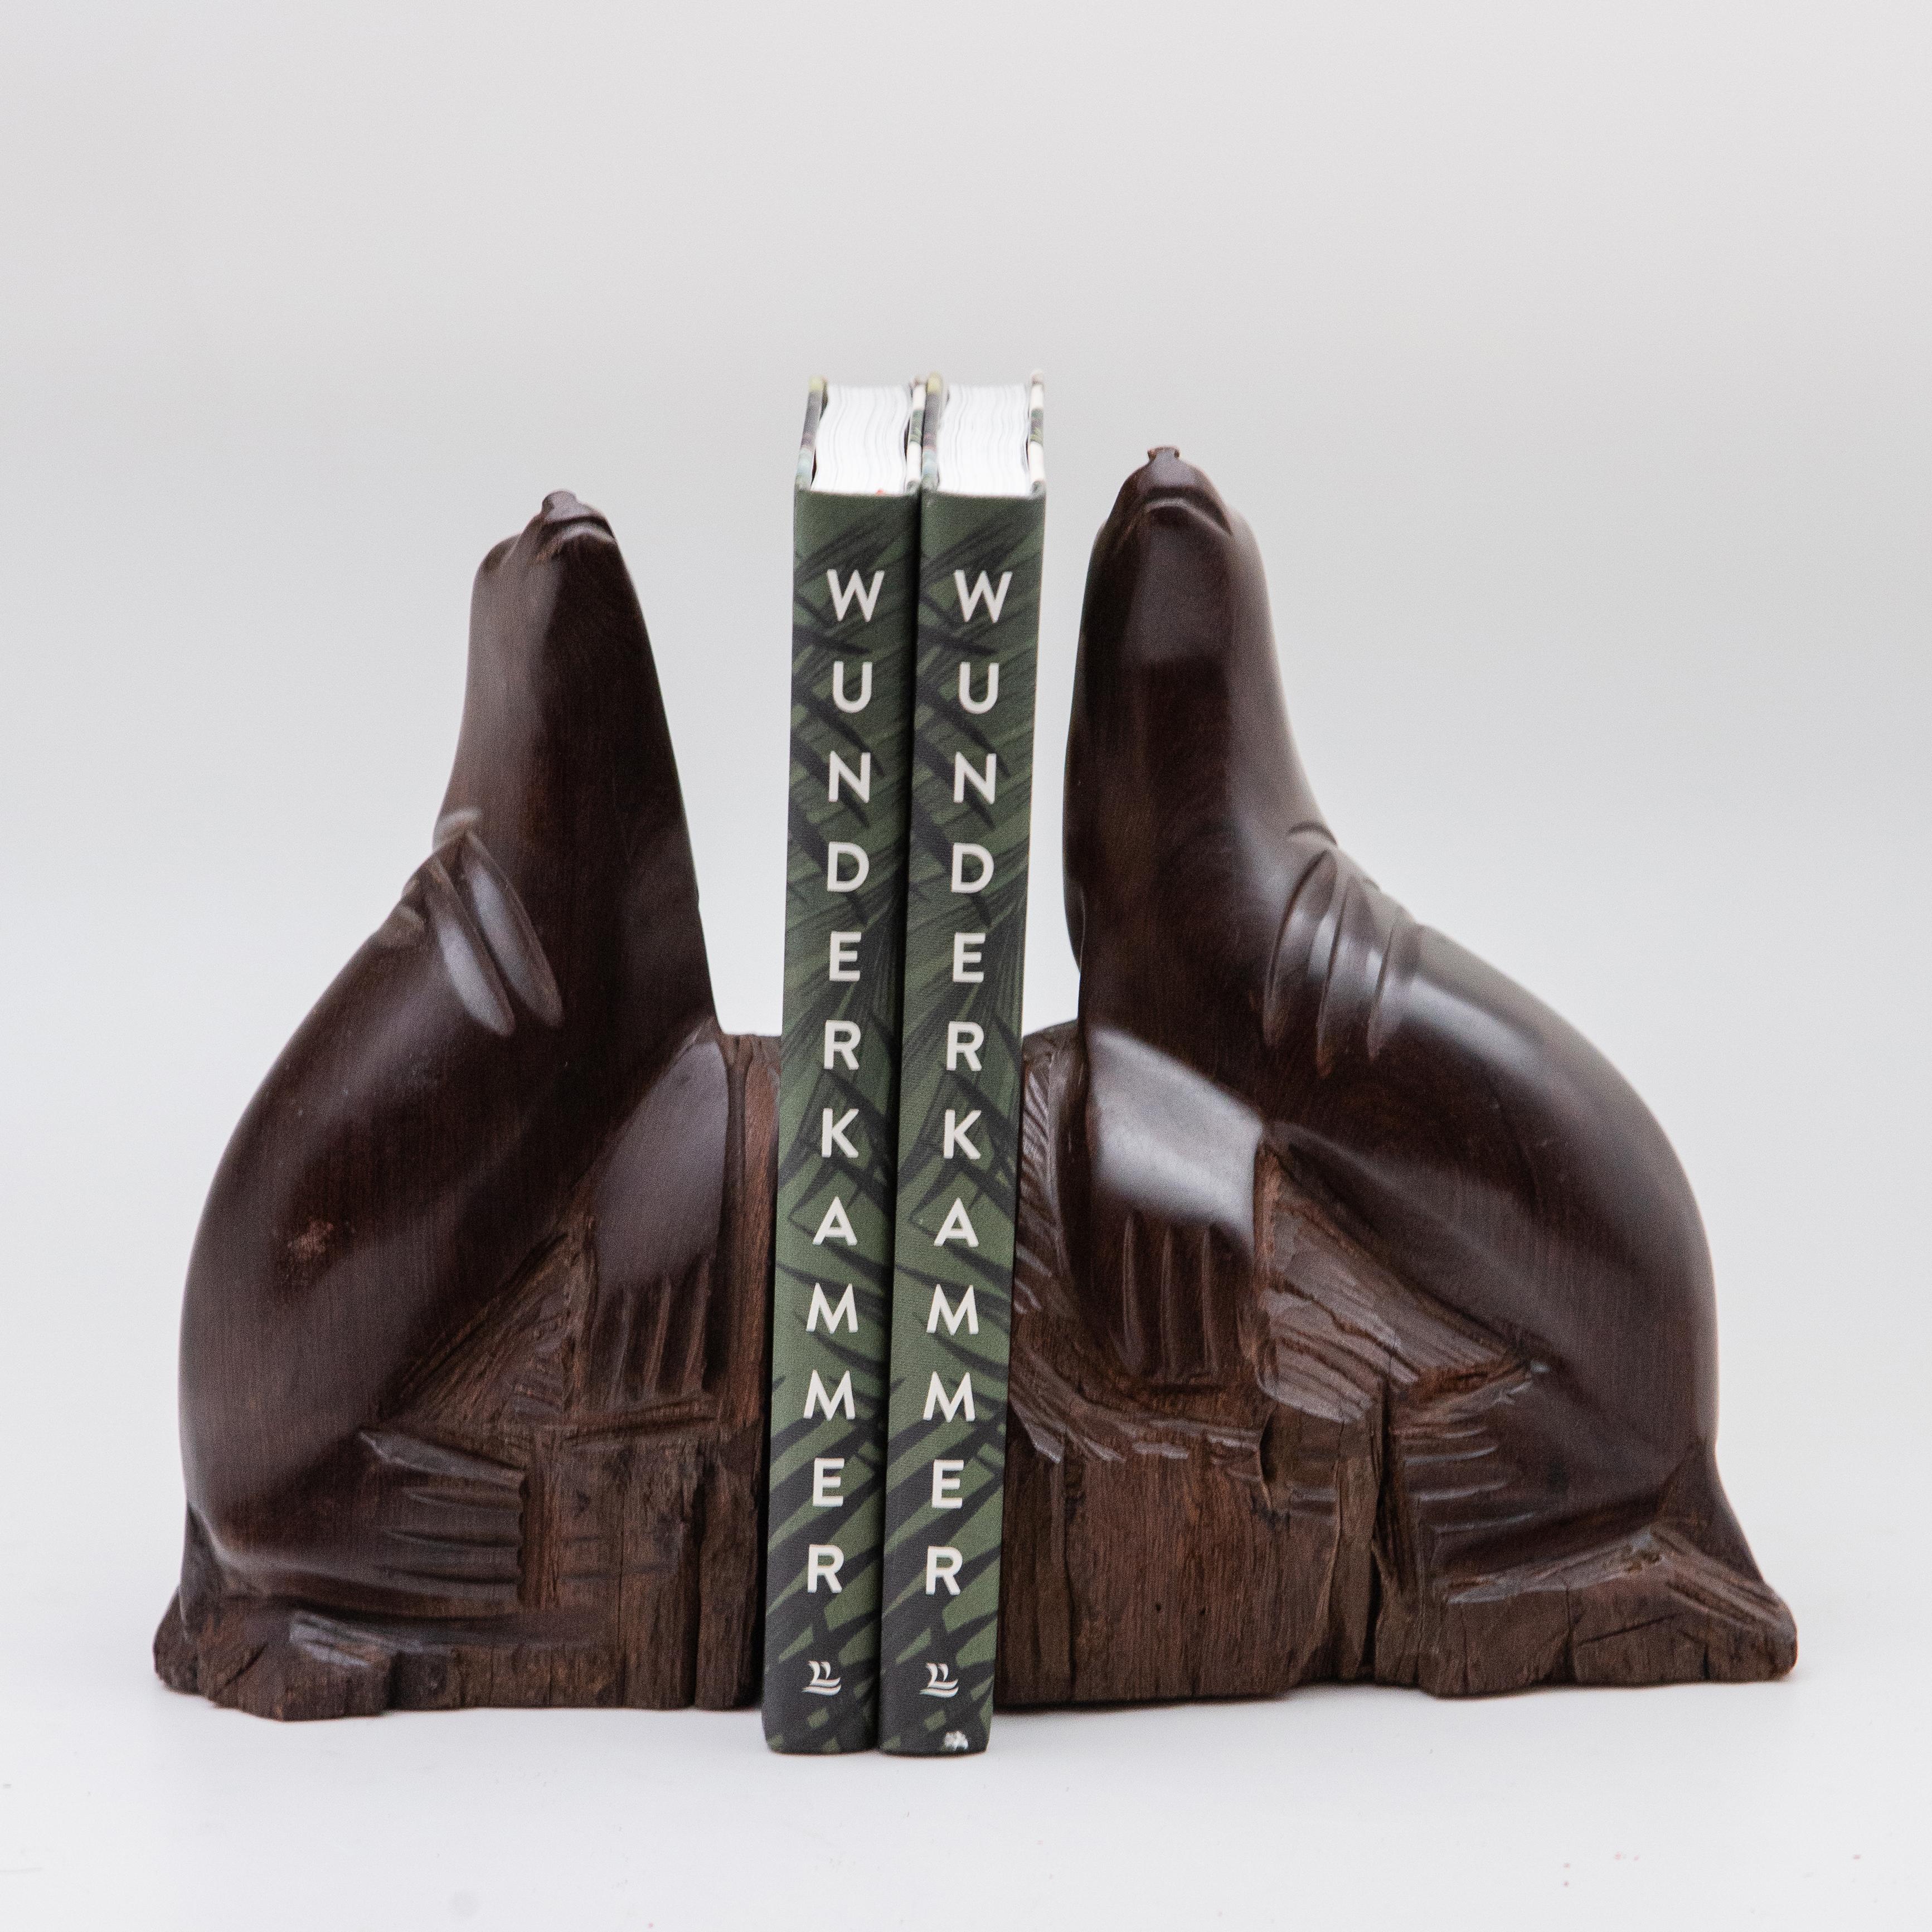 North American Hand-Carved Pair of Ironwood Sea Lion Bookends